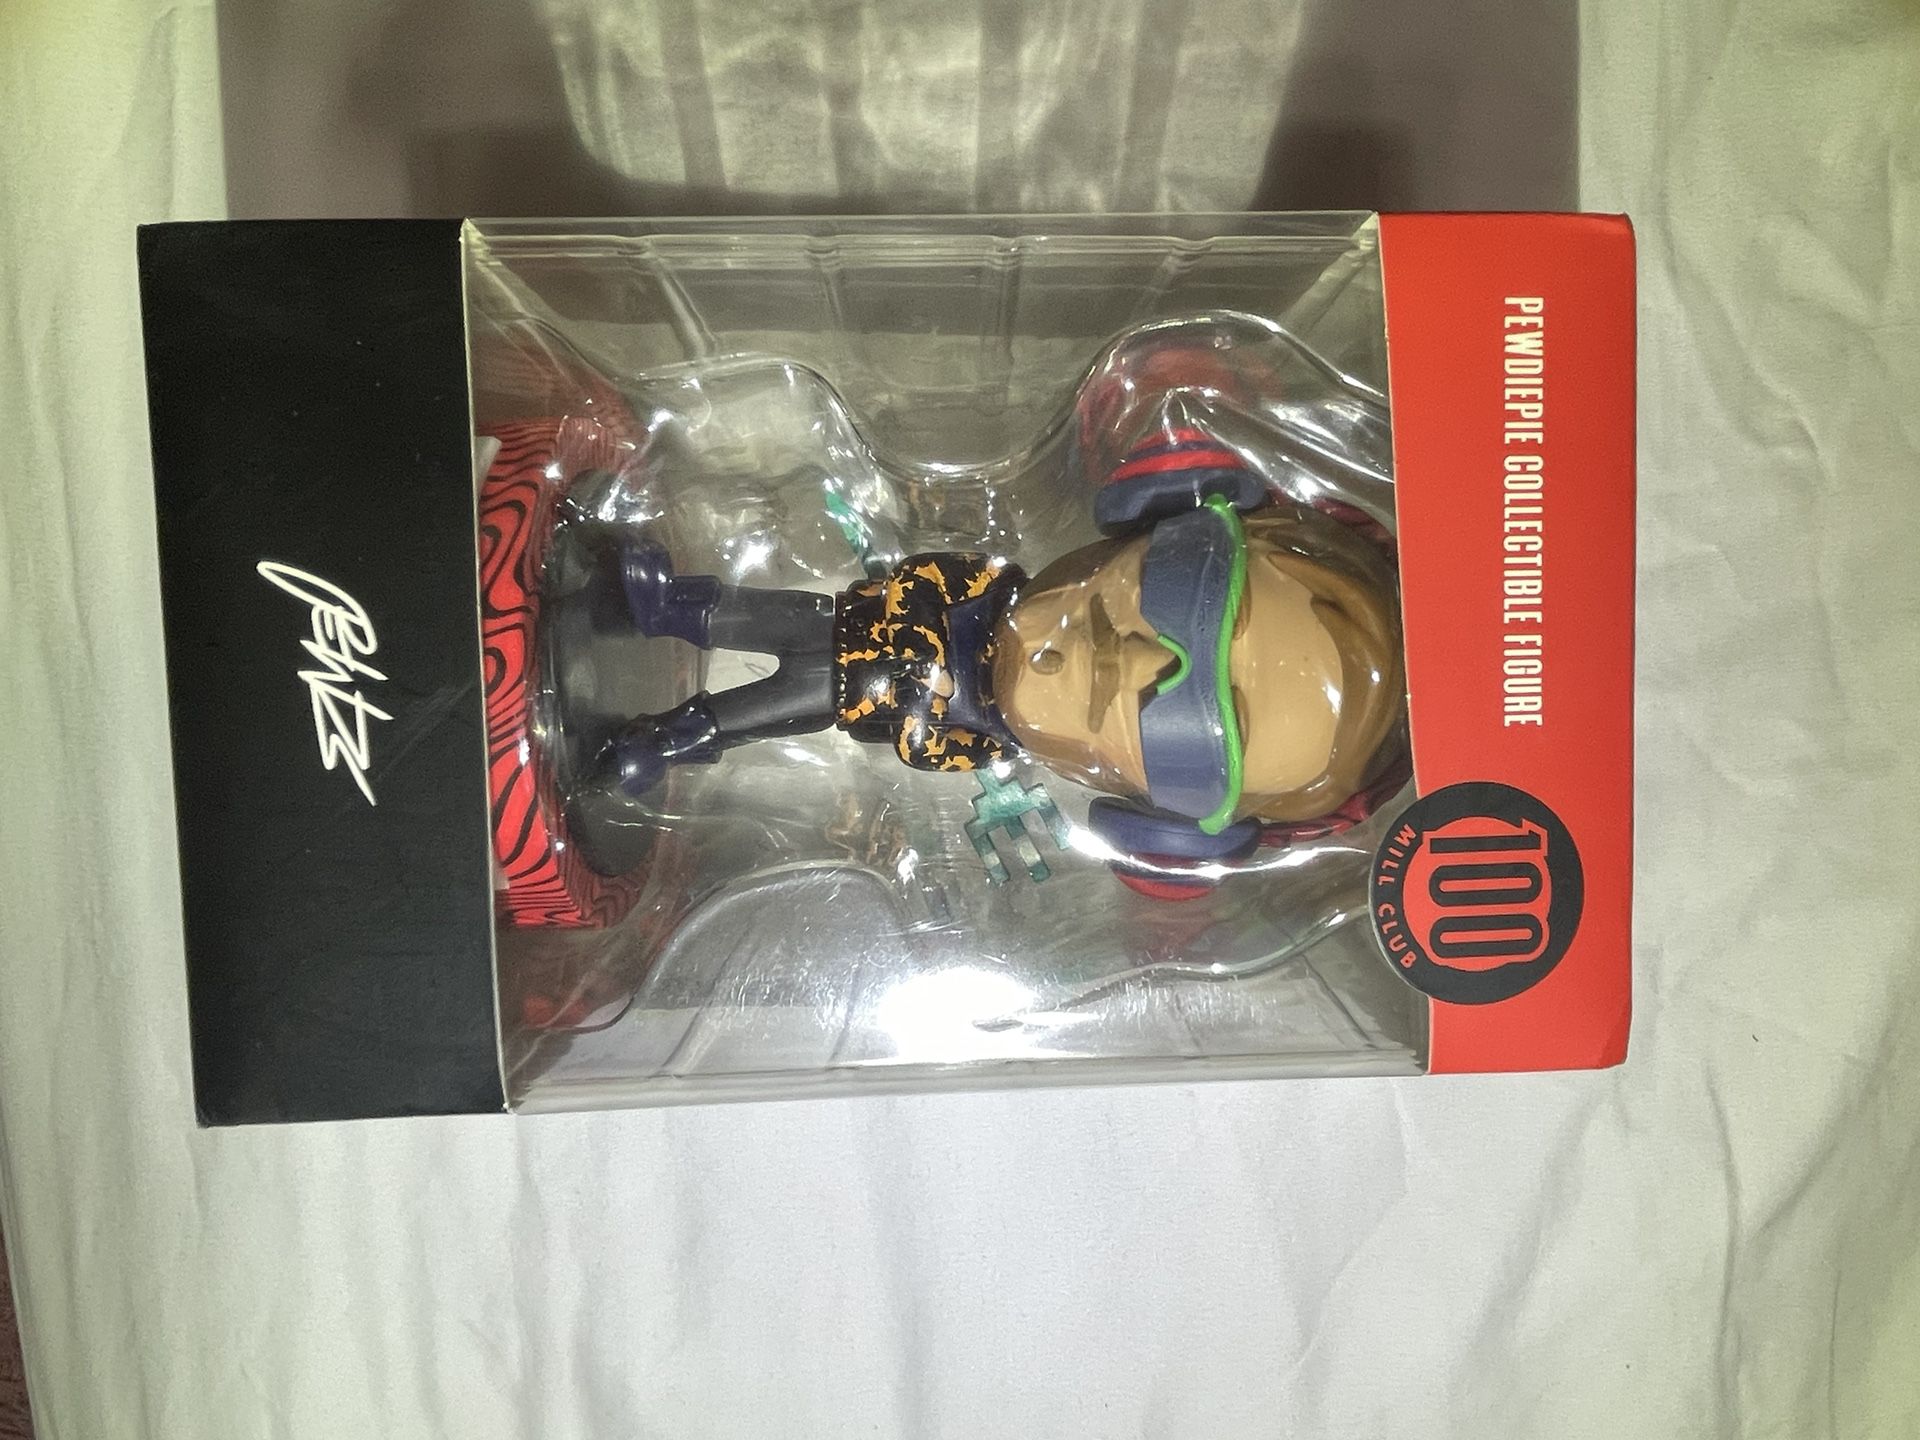 Pewdiepie Figure RARE Limited Edition Gamer Youtuber 100 Mill Club Toy